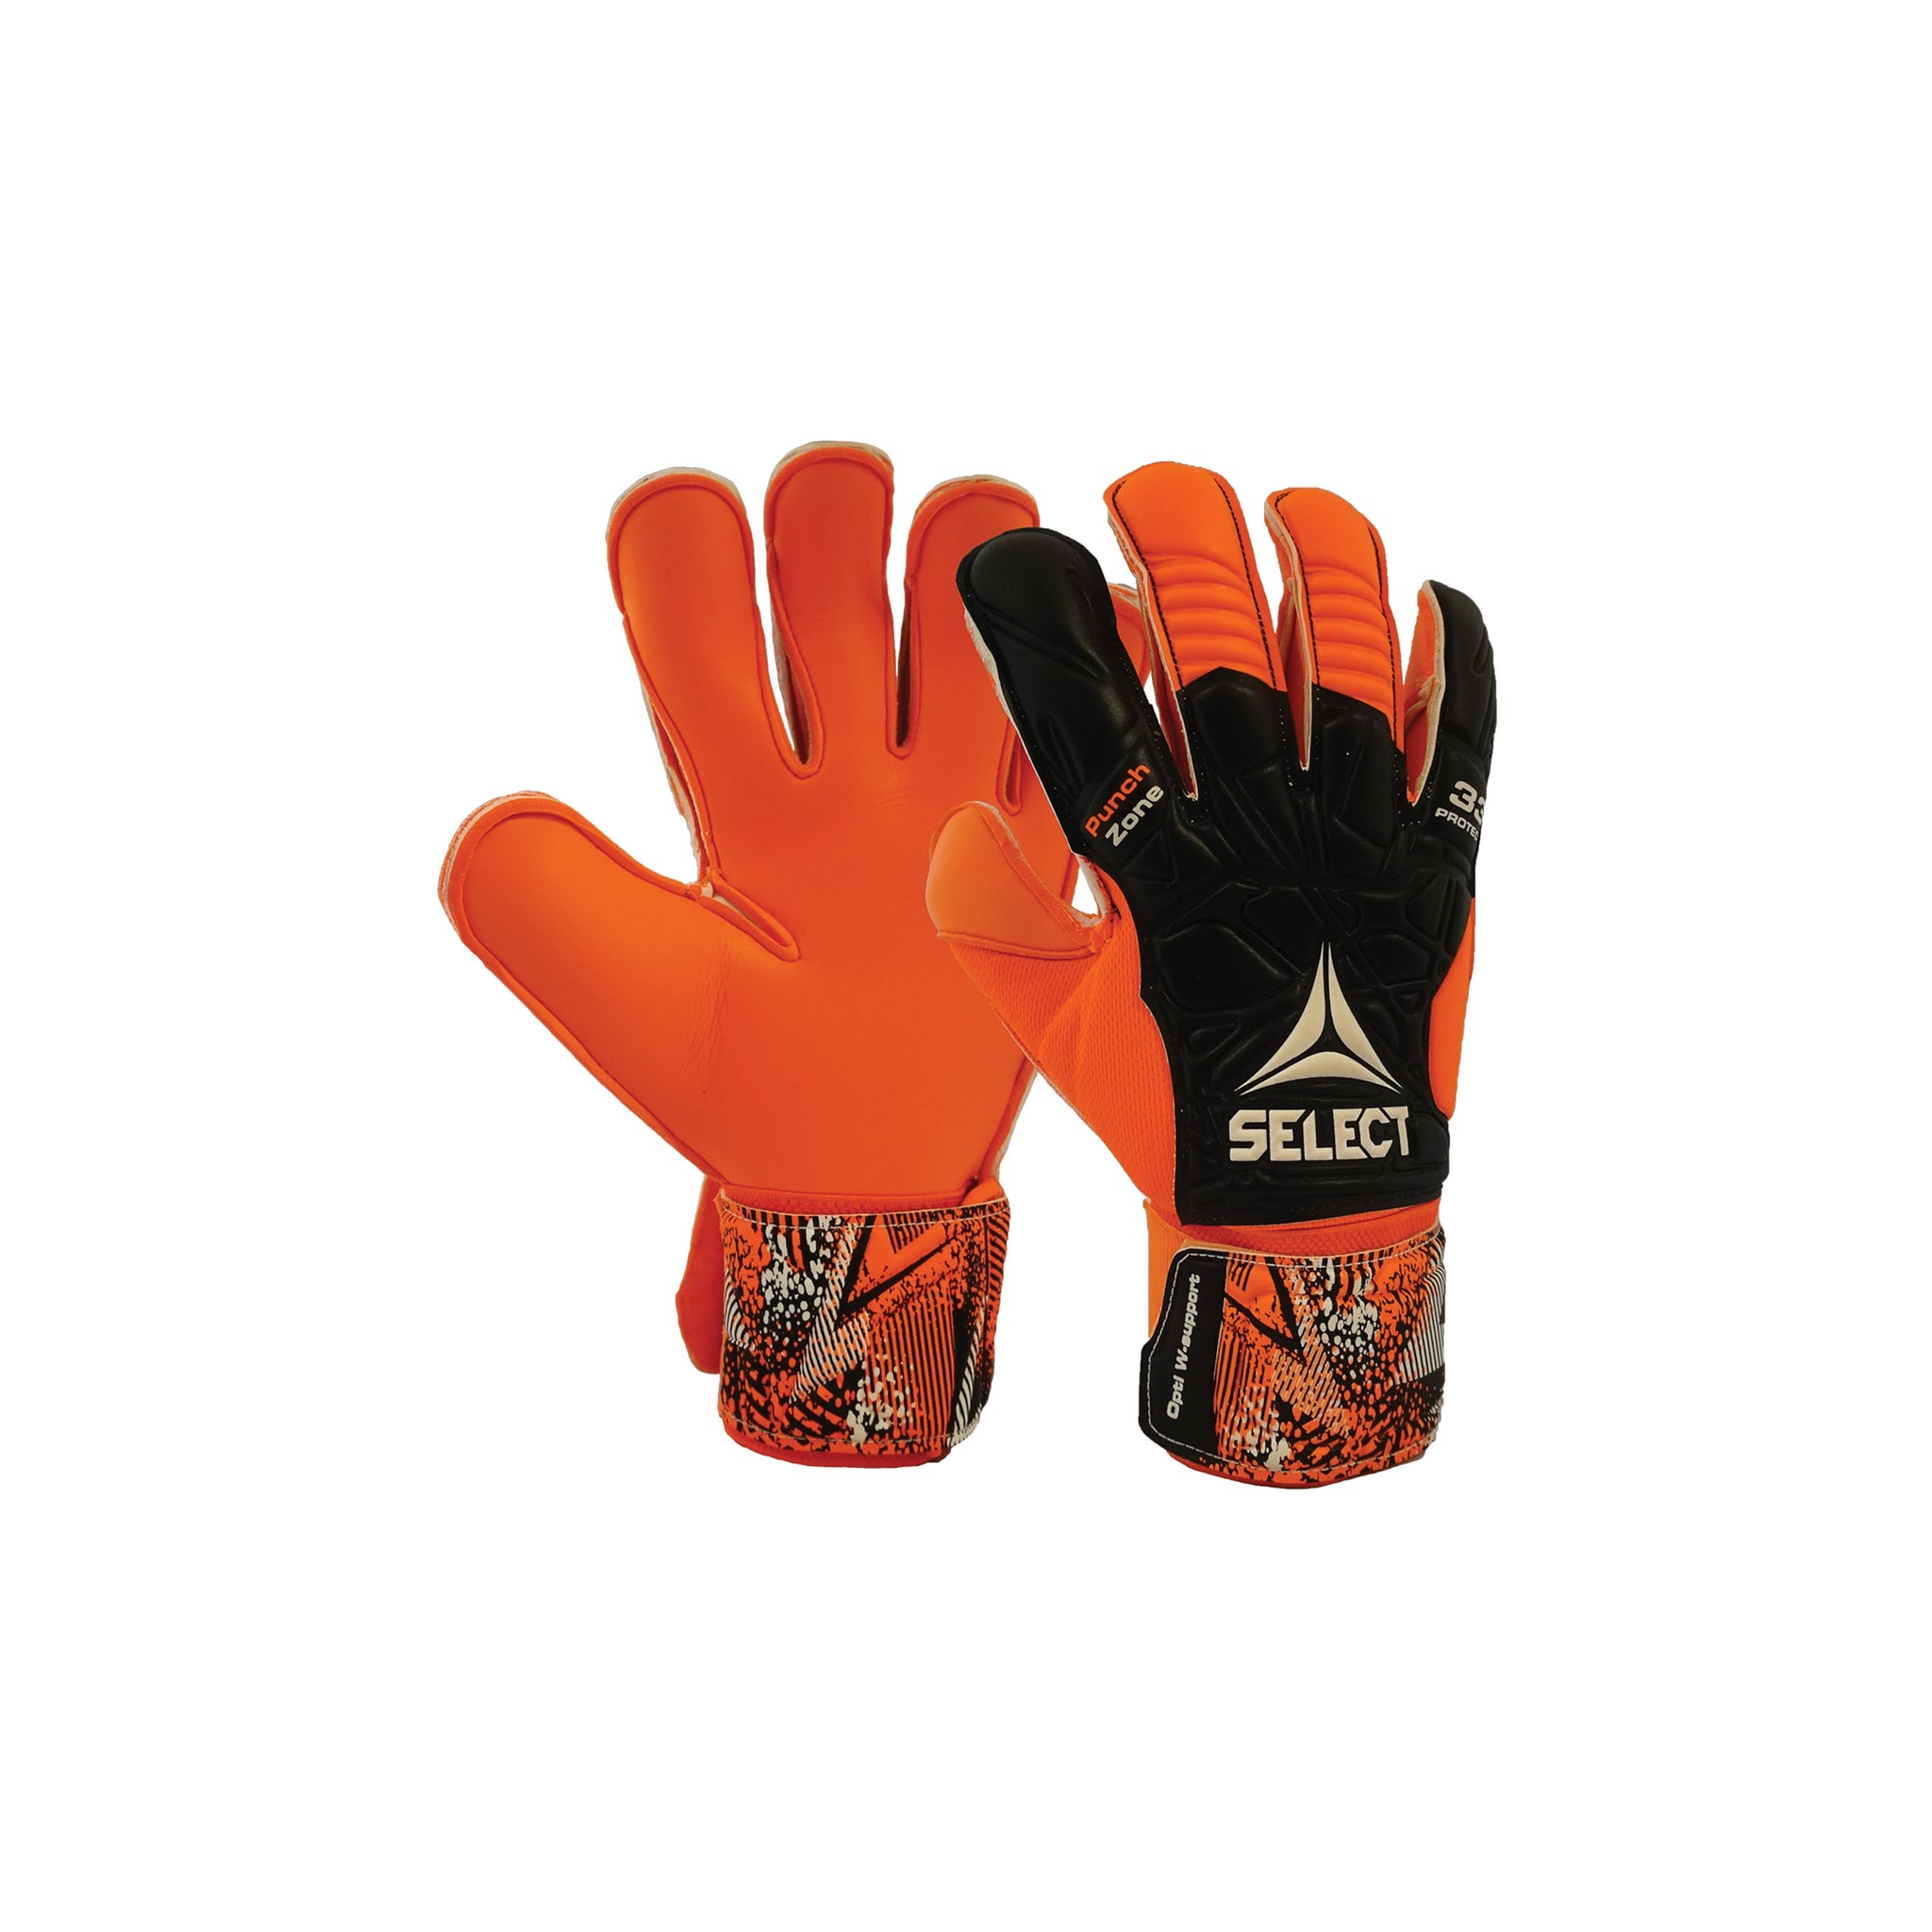 SELECT 33 Protect HG Gloves